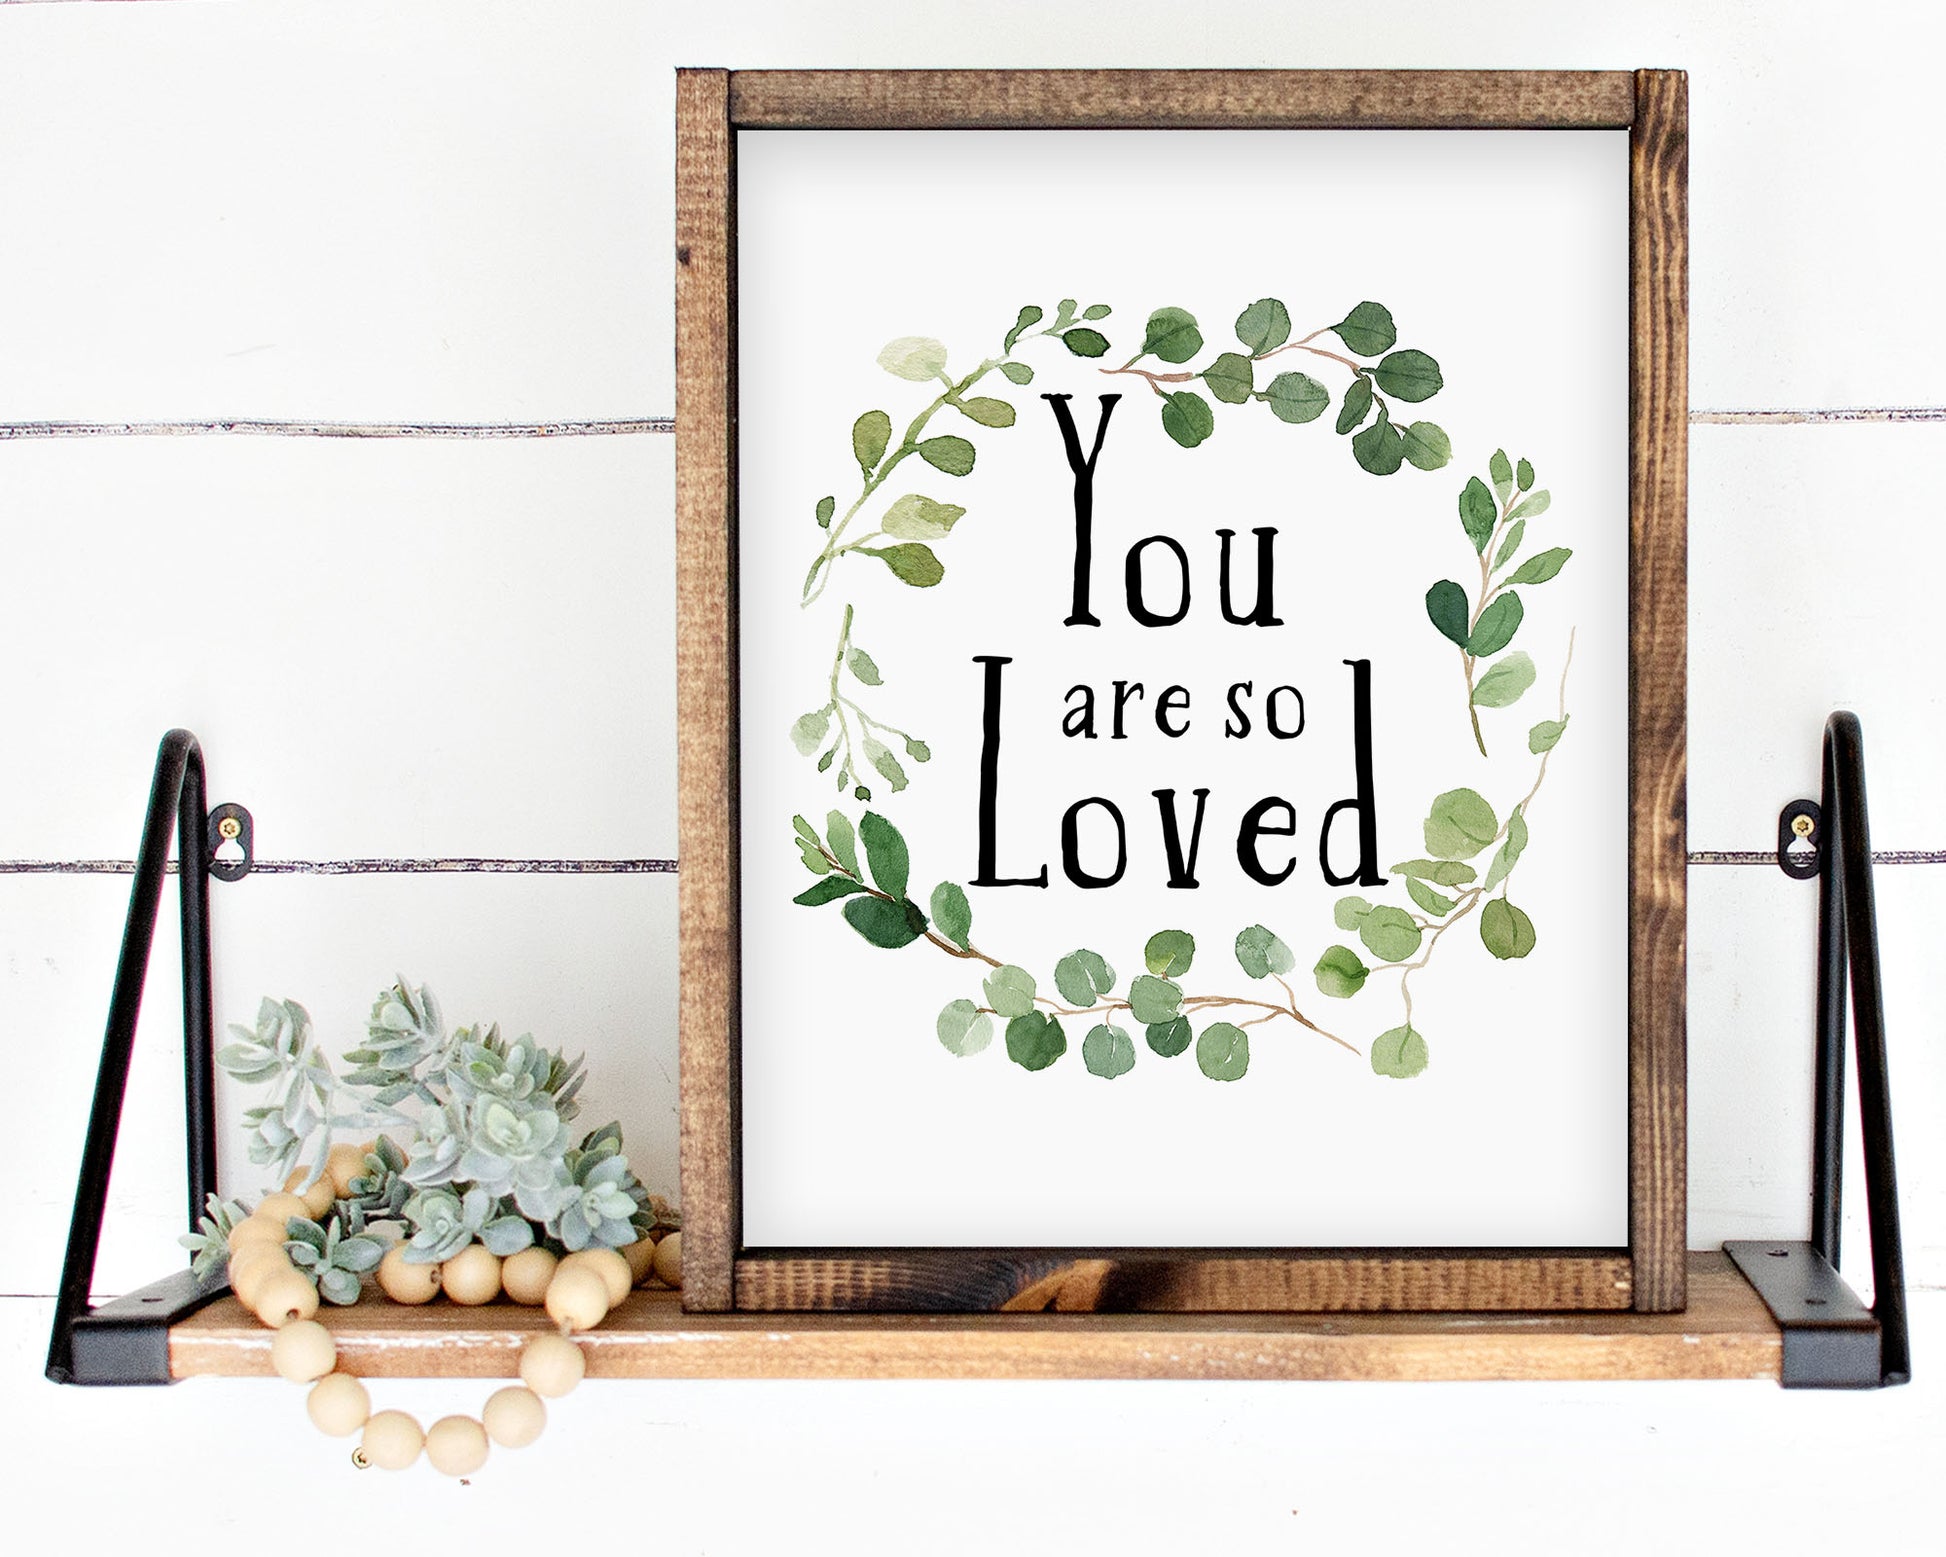 Watercolor Eucalyptus Greenery Wreath You Are So Loved Printable Wall Art. Great for Baby Boy or Baby Girl Nursery Decor or Kids Room Wall Hangings.